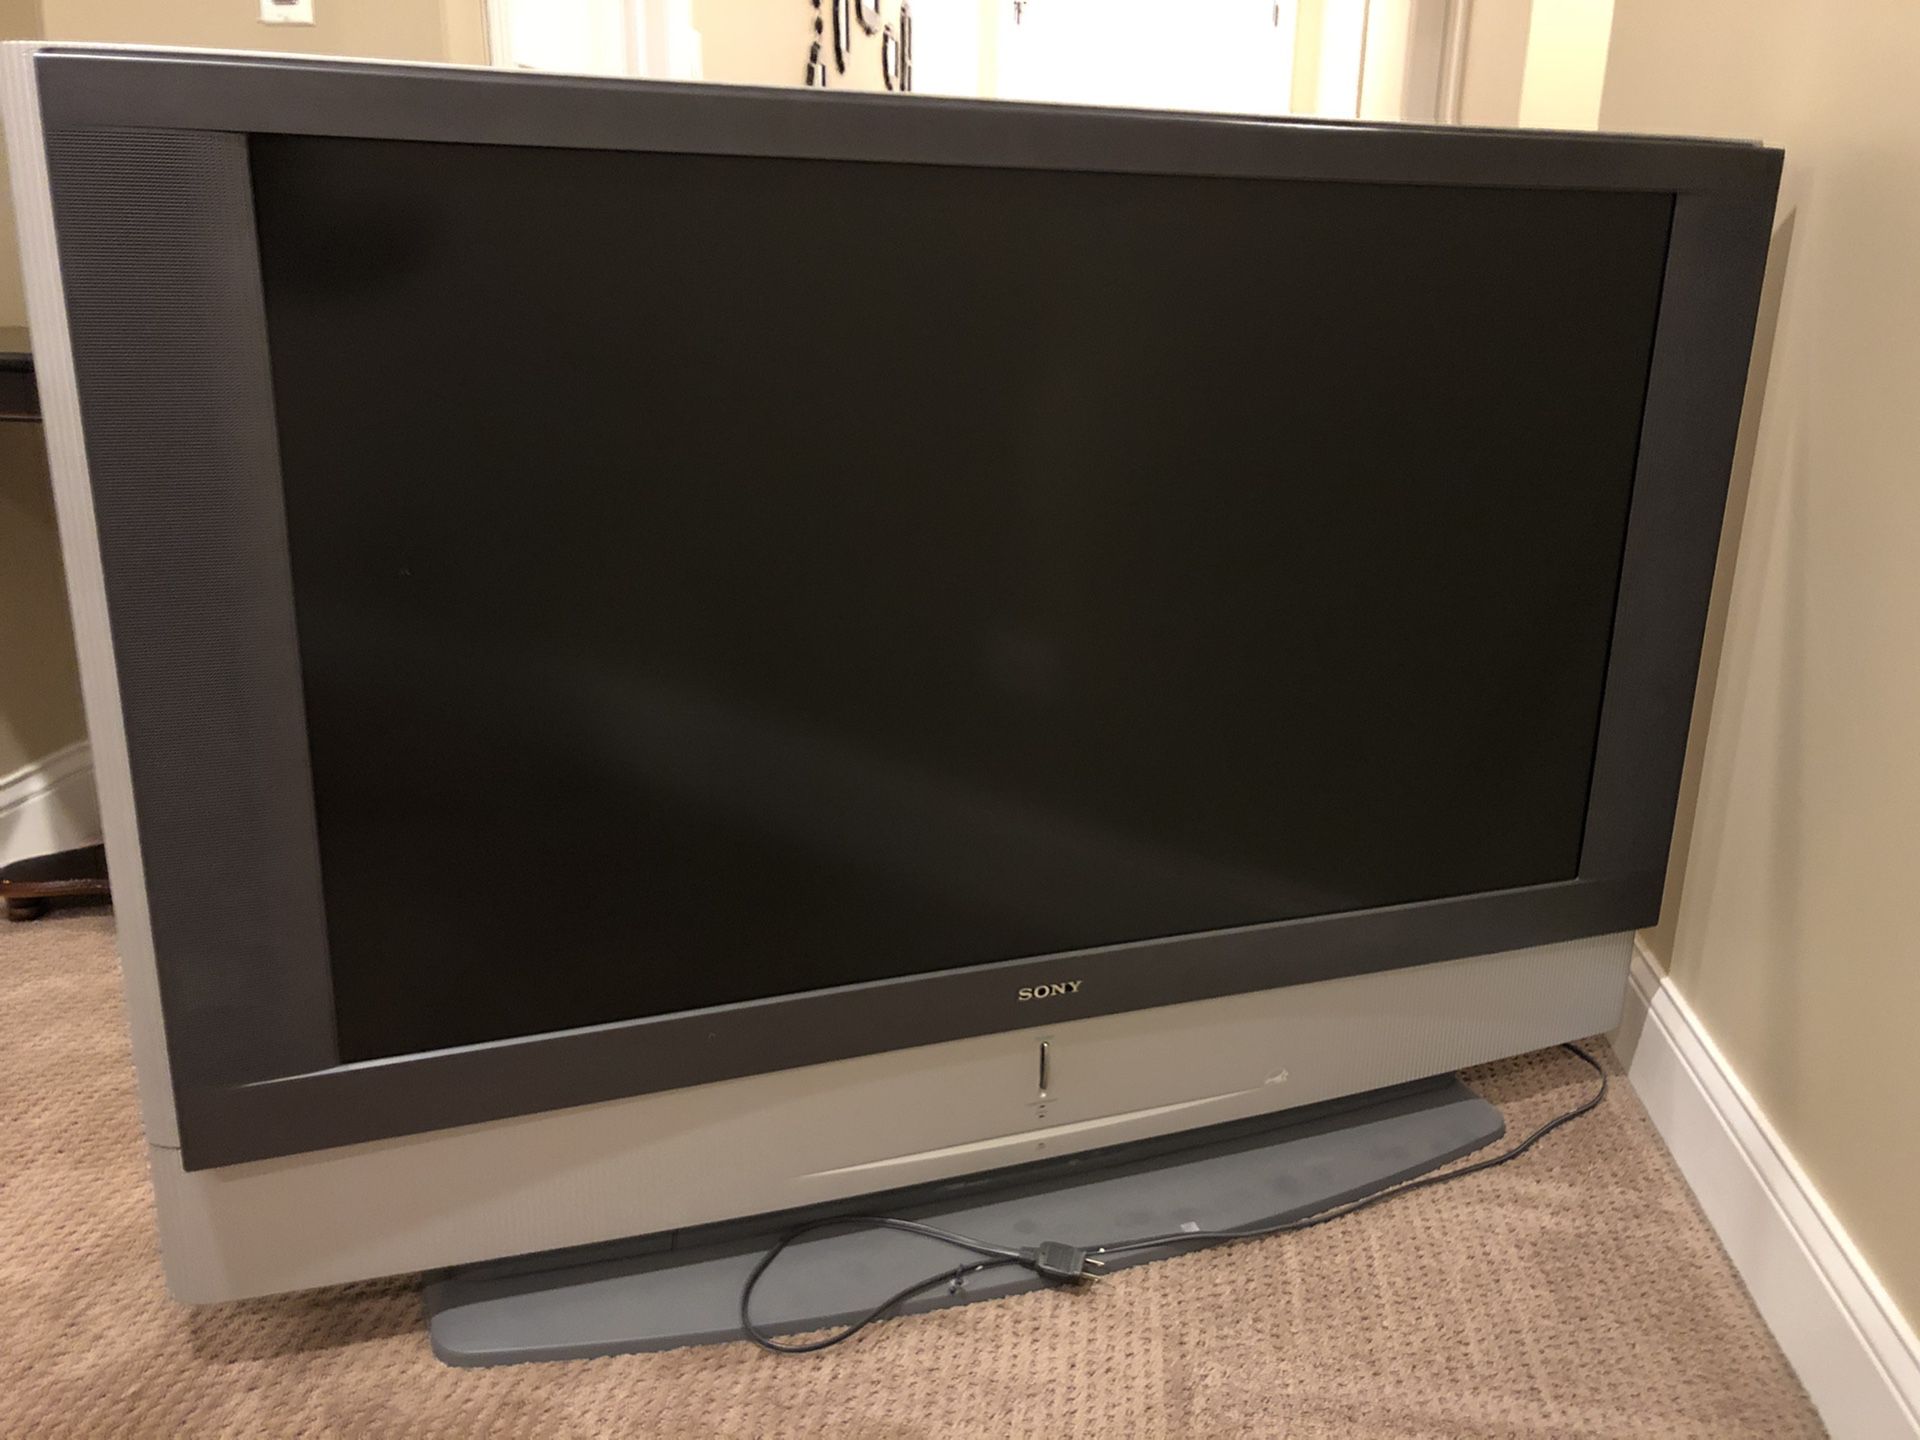 Sony 50 inch LCD Projection TV